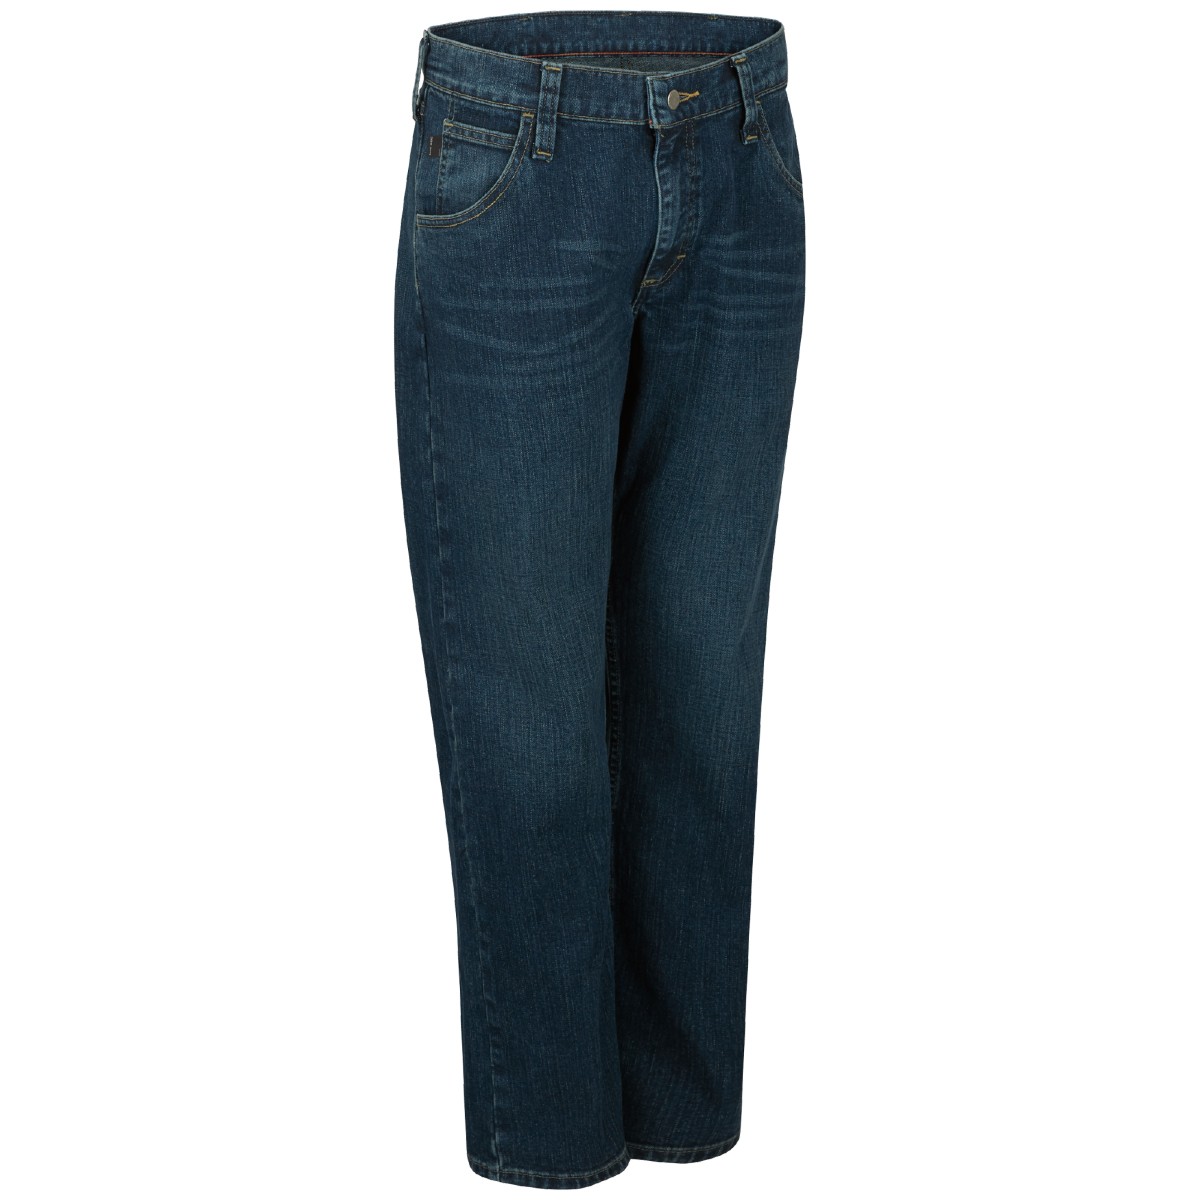 Bulwark Men’s Straight Fit Jean with Stretch